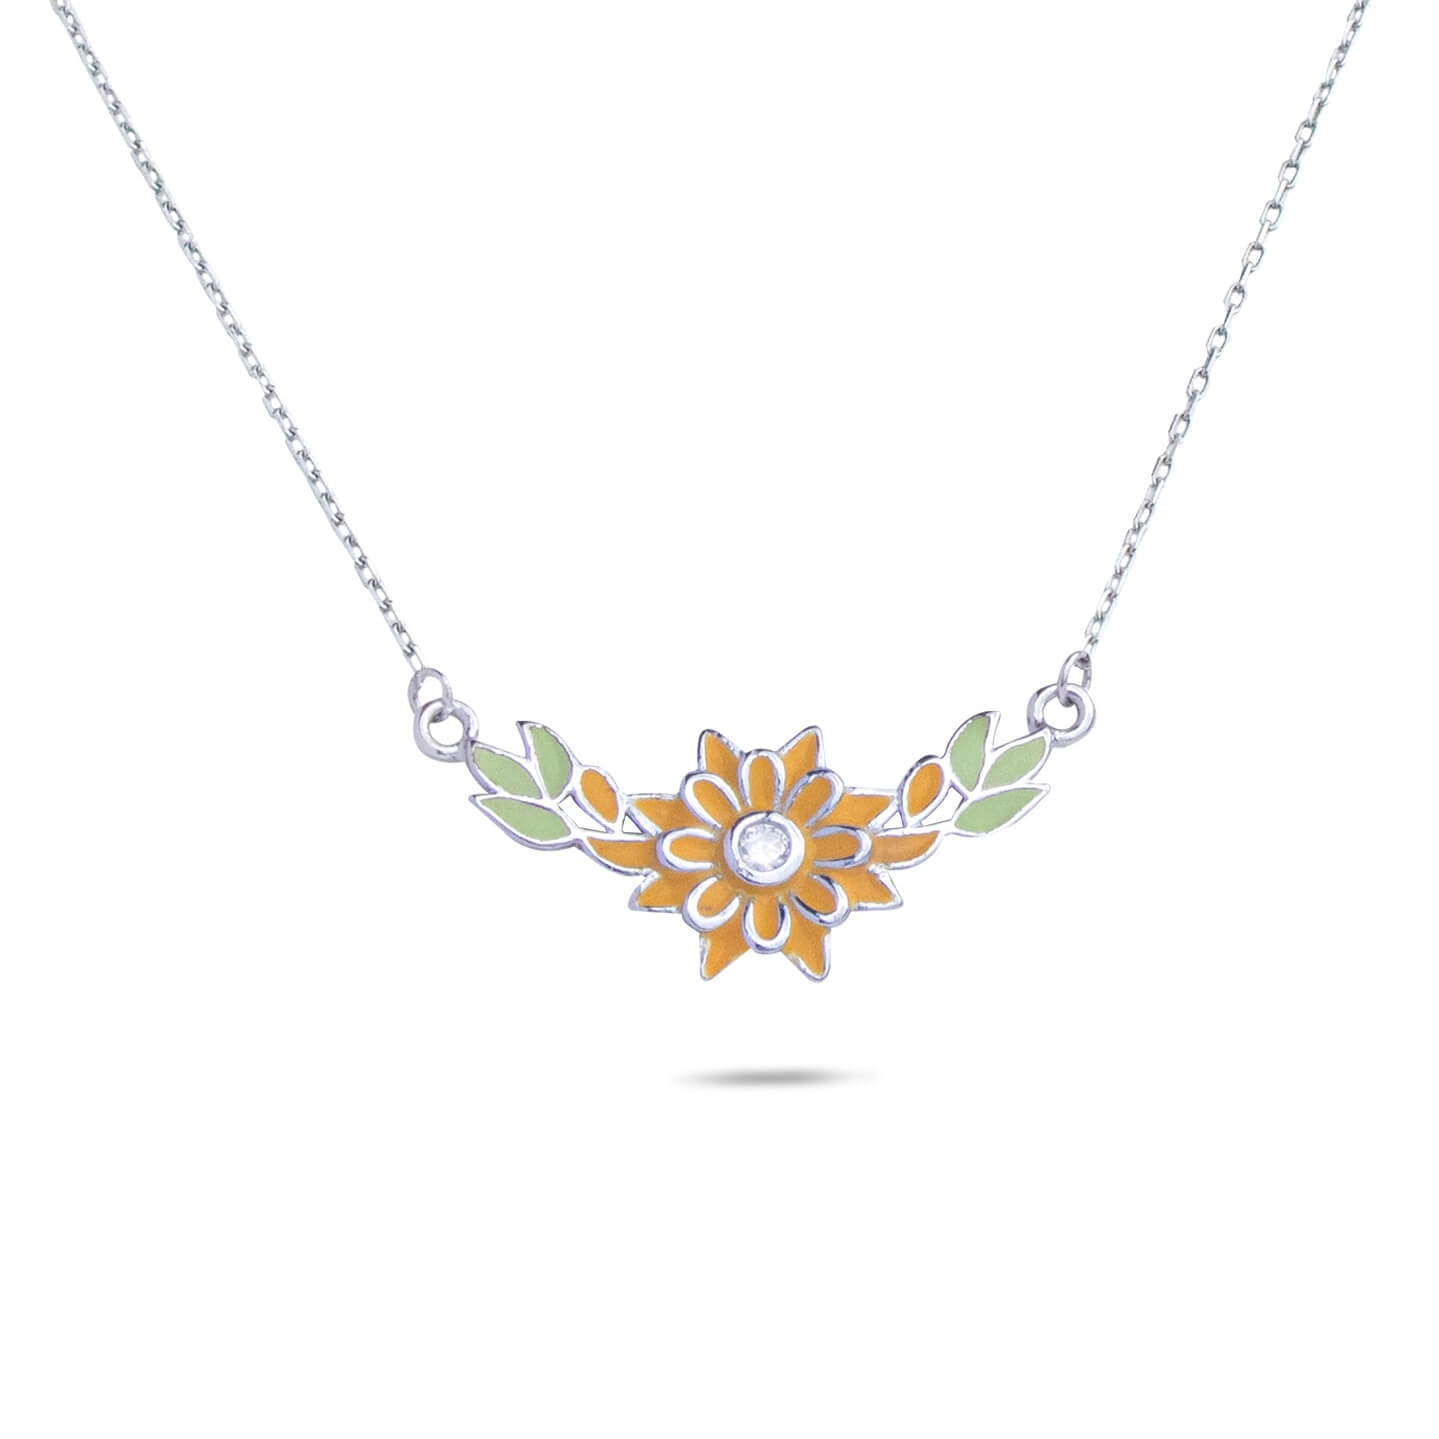 RRJ0187 Pure 925 Sterling Silver Necklace